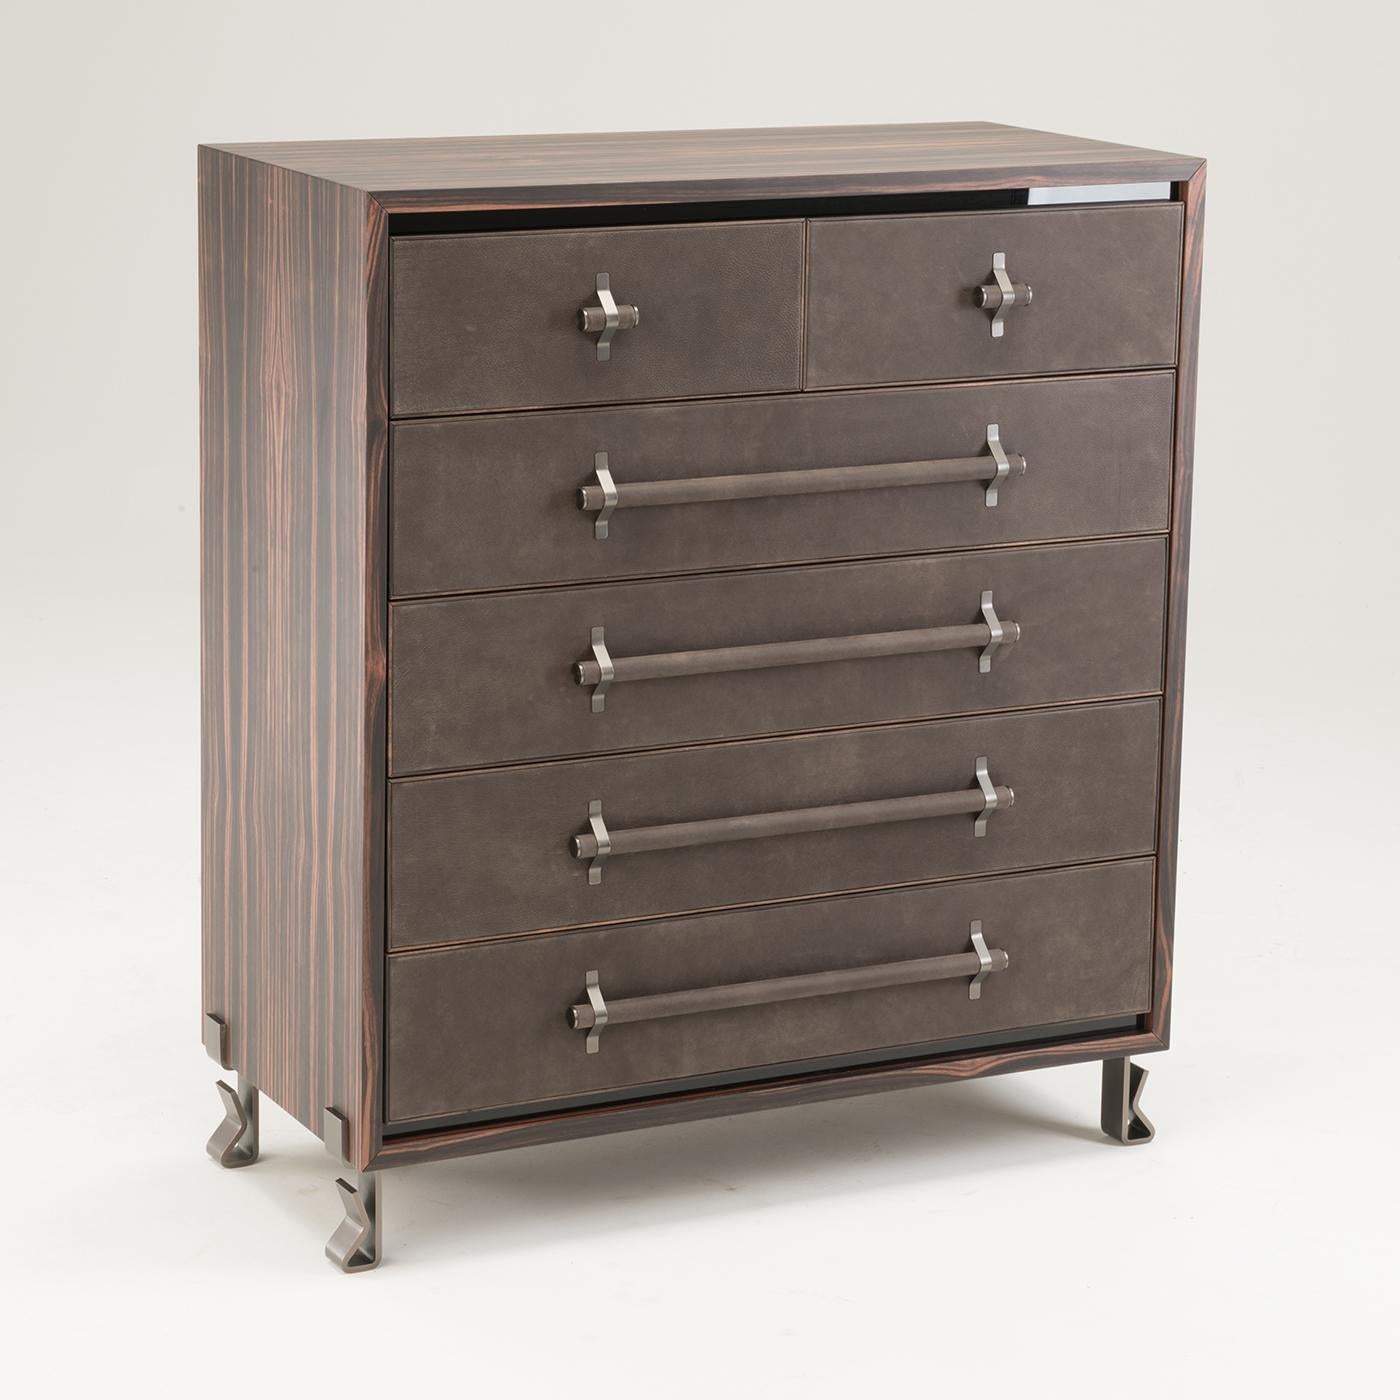 This chest of drawers is made from ebony wood that originated in Madagascar. It features matte gray lacquered drawers, whose front is covered in genuine leather with ebony trim. The item also includes black parapan inserts and stainless steel